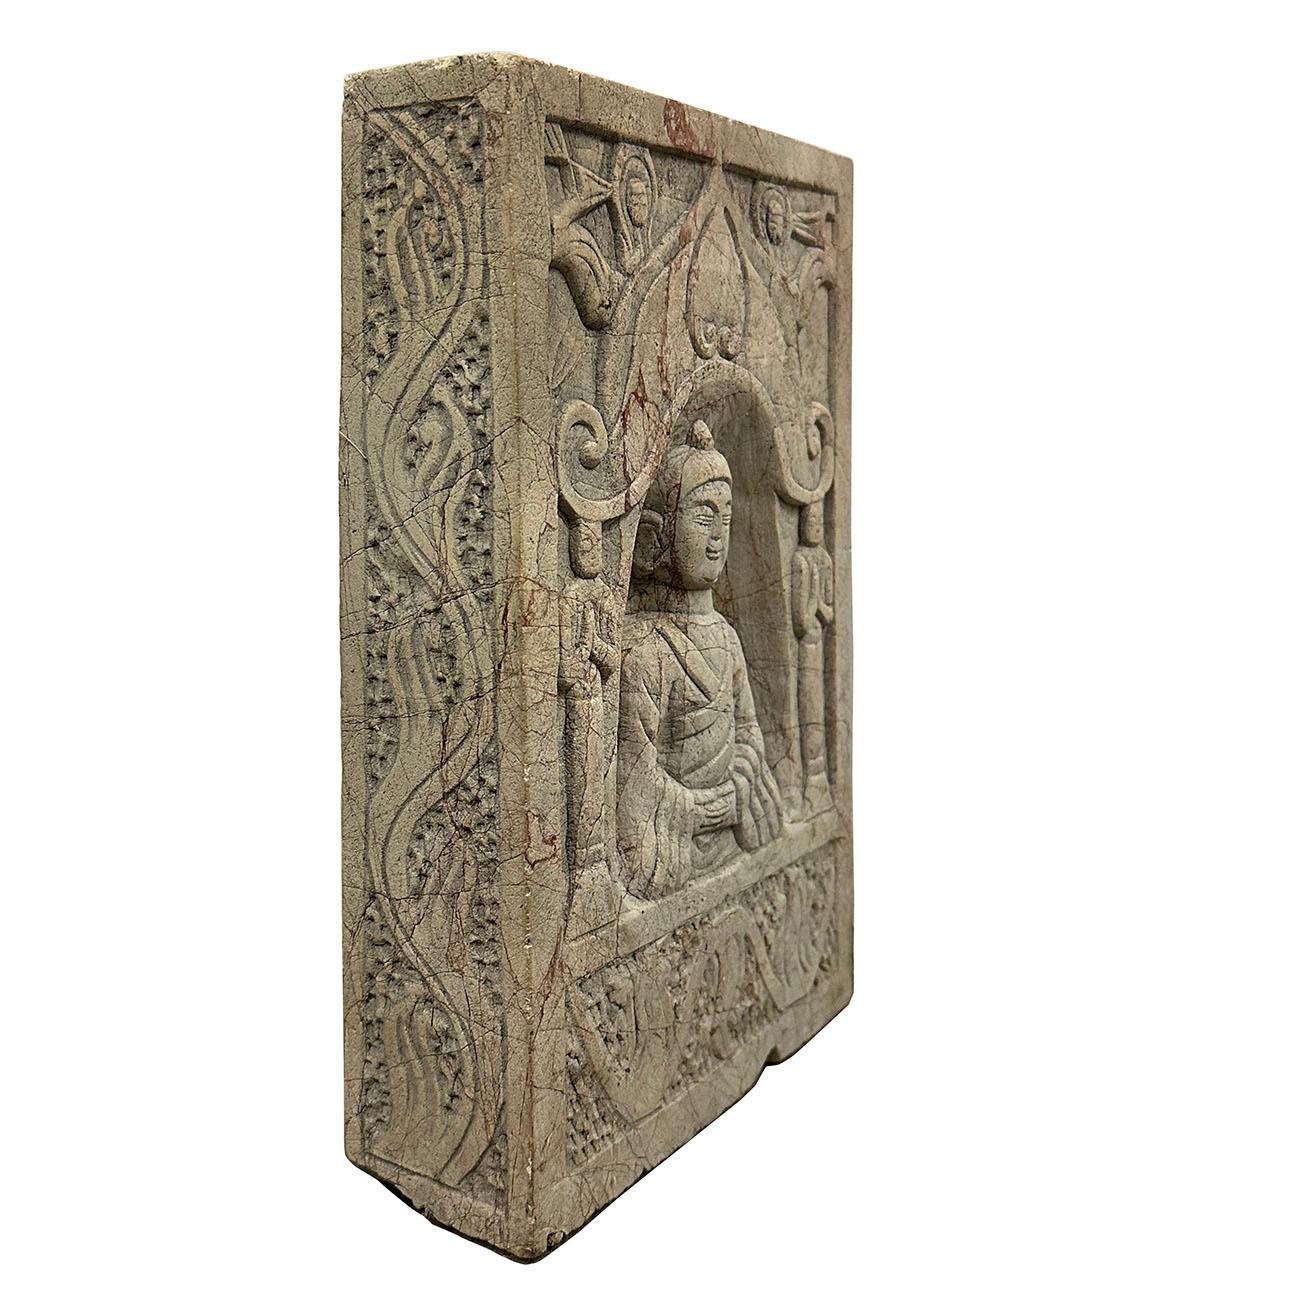 A Chinese antique carved stone wall plaque with traces of original polymorphic and nice patina. Crafted in China, this carved stone wall plaque will make for an exquisite decorative addition. Featuring a vertical format skillfully adorned with a